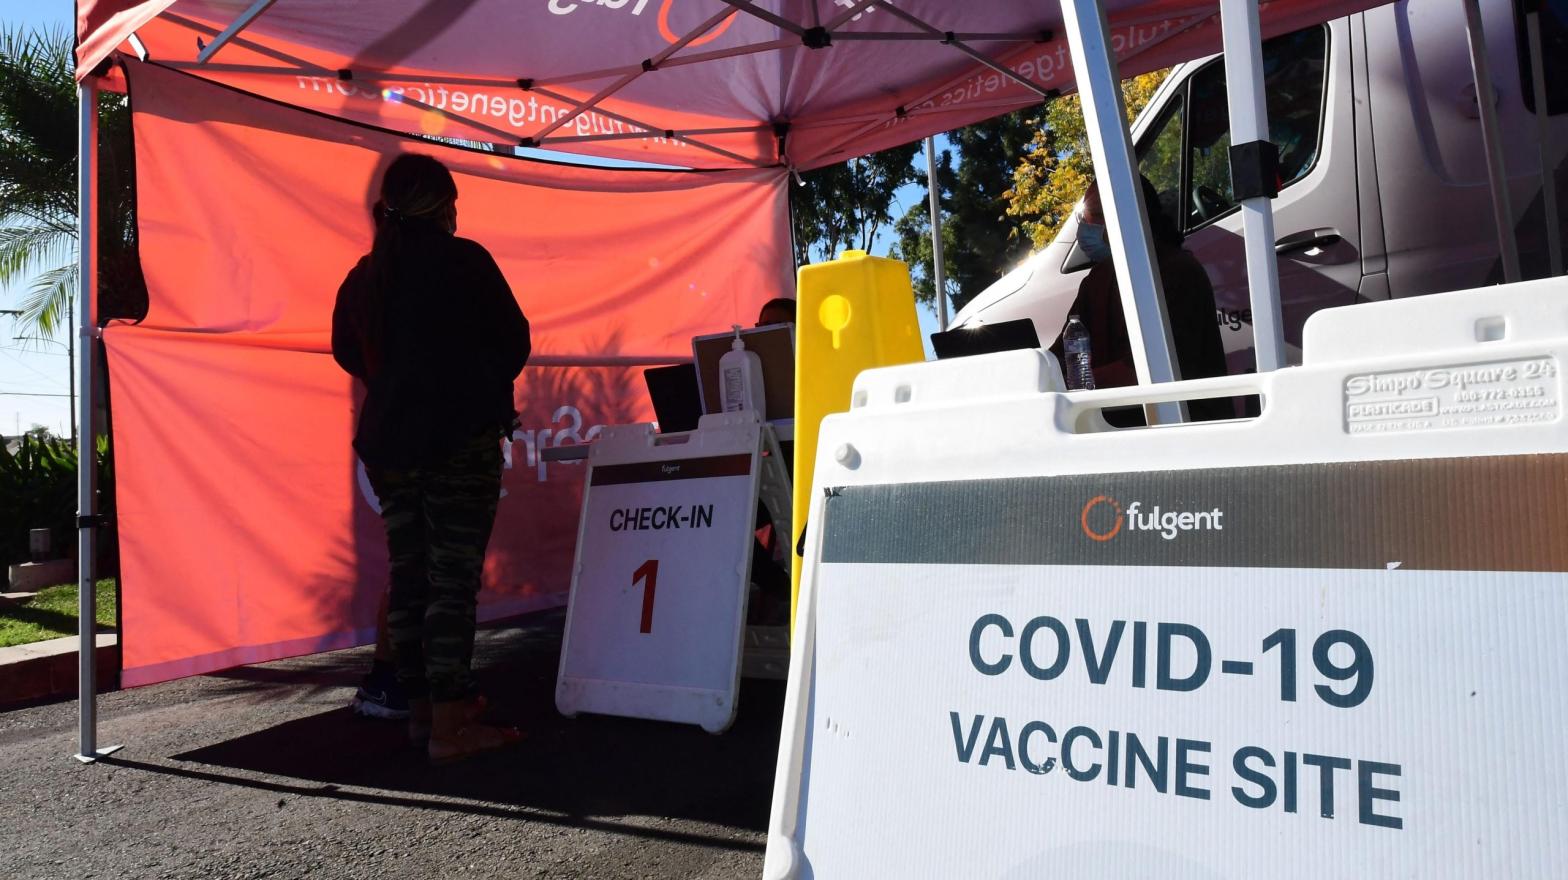 People check-in for their covid-19 vaccine at a pop-up clinic offering vaccines and booster shots in Rosemead, California on November 29, 2021 (Photo: Fredric J. Brown/AFP, Getty Images)